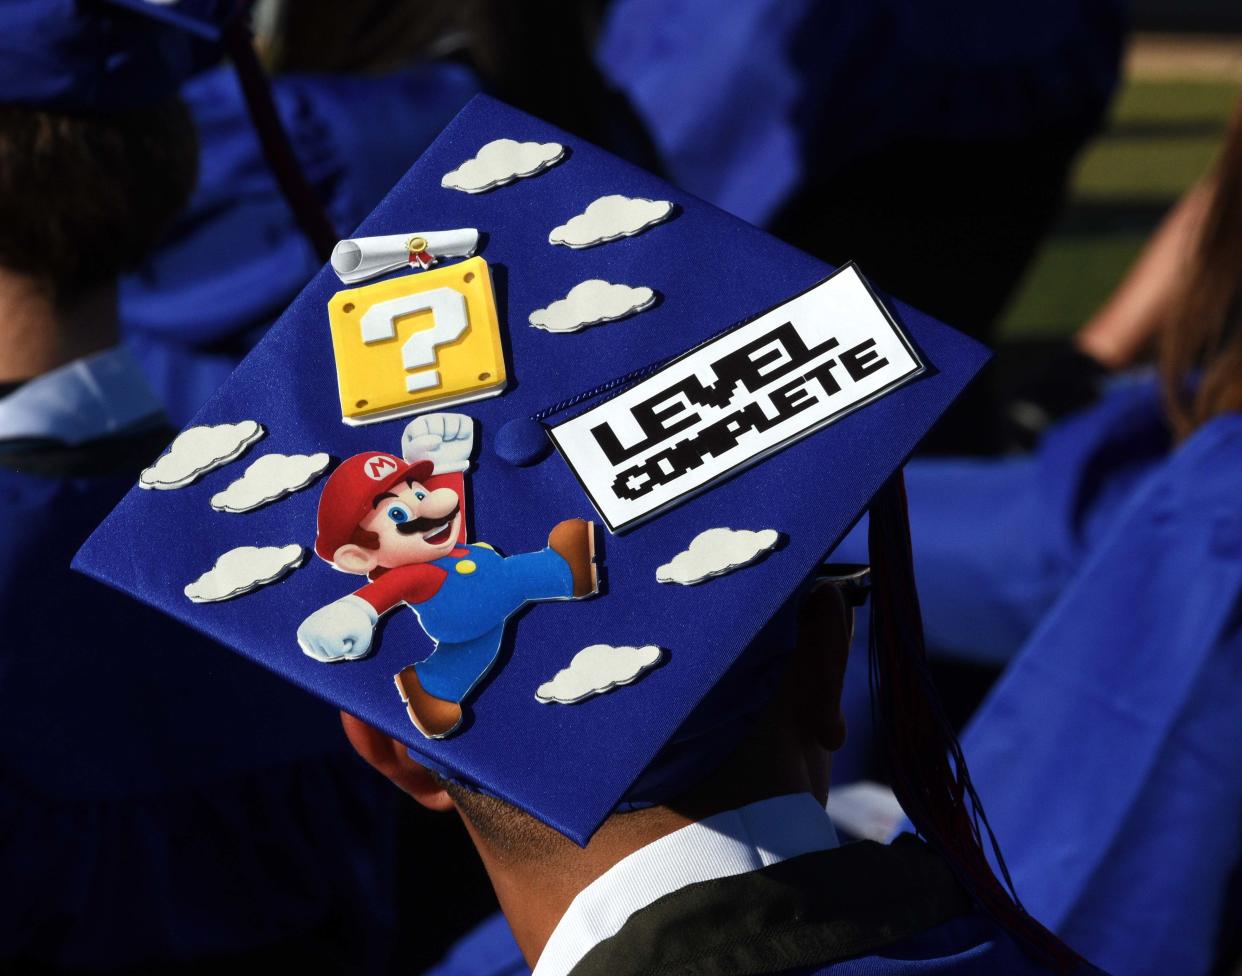 A Las Cruces High School graduate shows off their mortarboard at the Field of Dreams Saturday, May 21, 2022. New Mexico lawmakers and state education officials are looking at overhauling required high school coursework for future graduates.